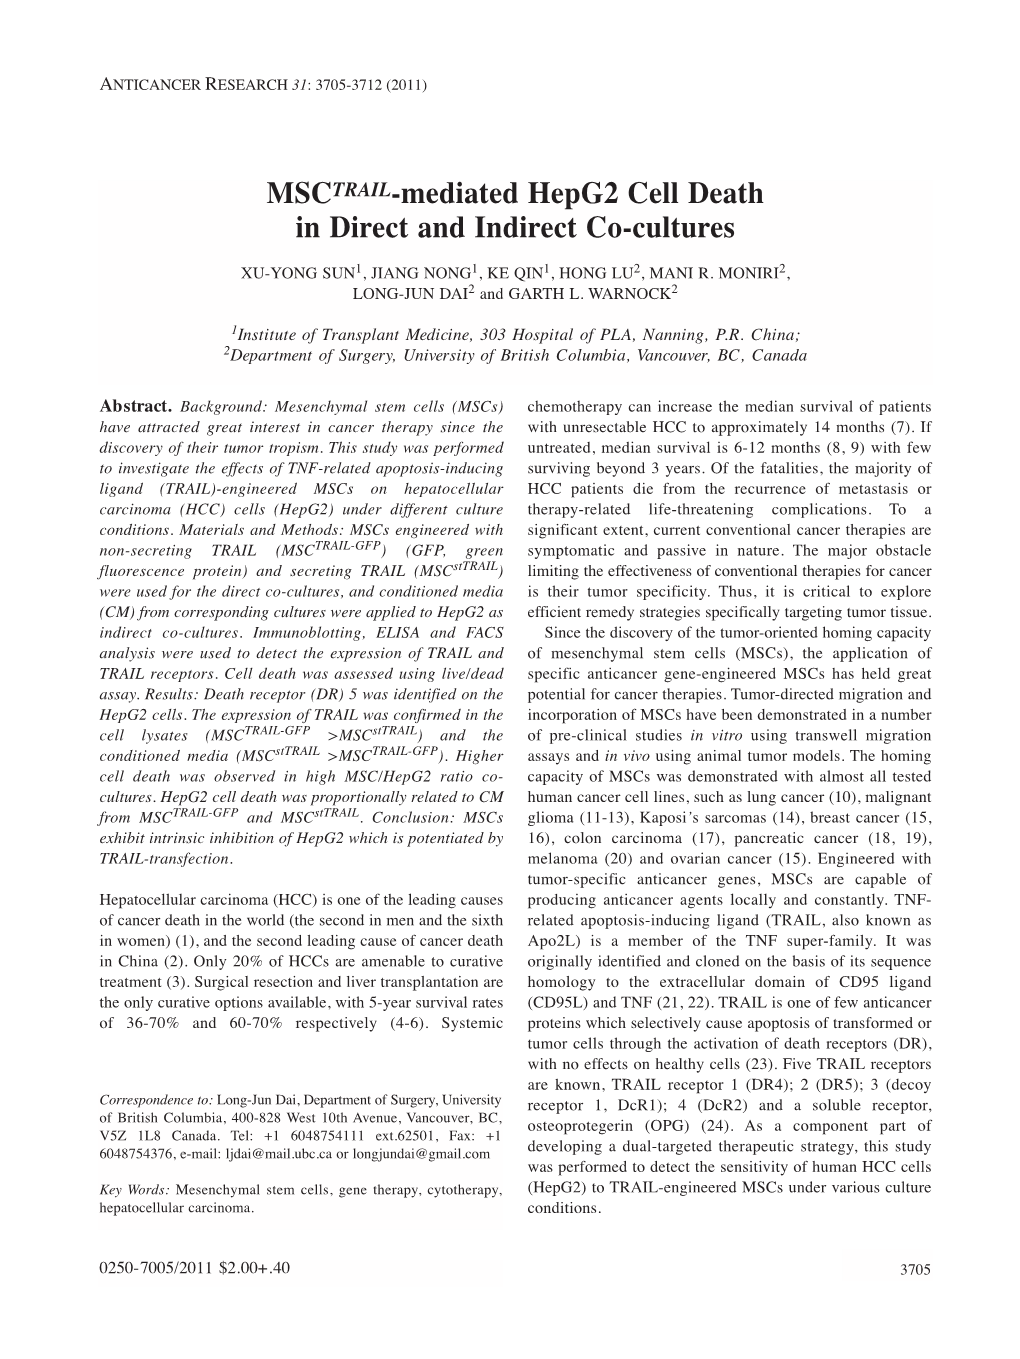 Mediated Hepg2 Cell Death in Direct and Indirect Co-Cultures